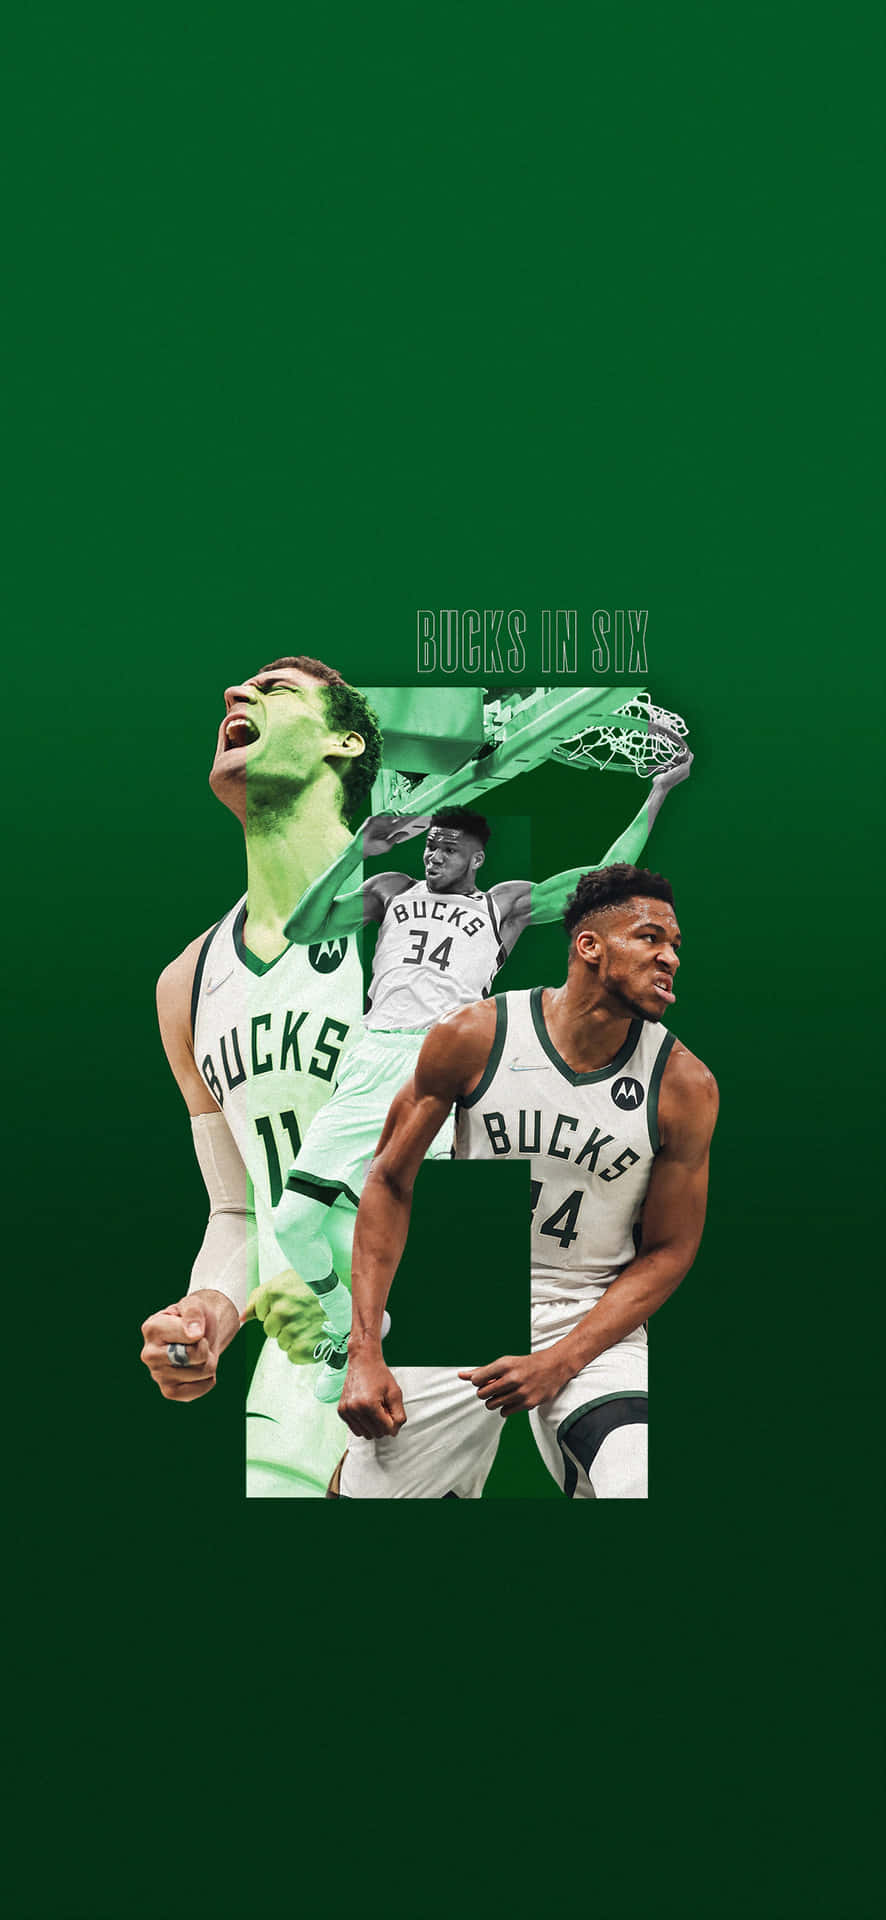 A Green Background With Two Basketball Players Wallpaper